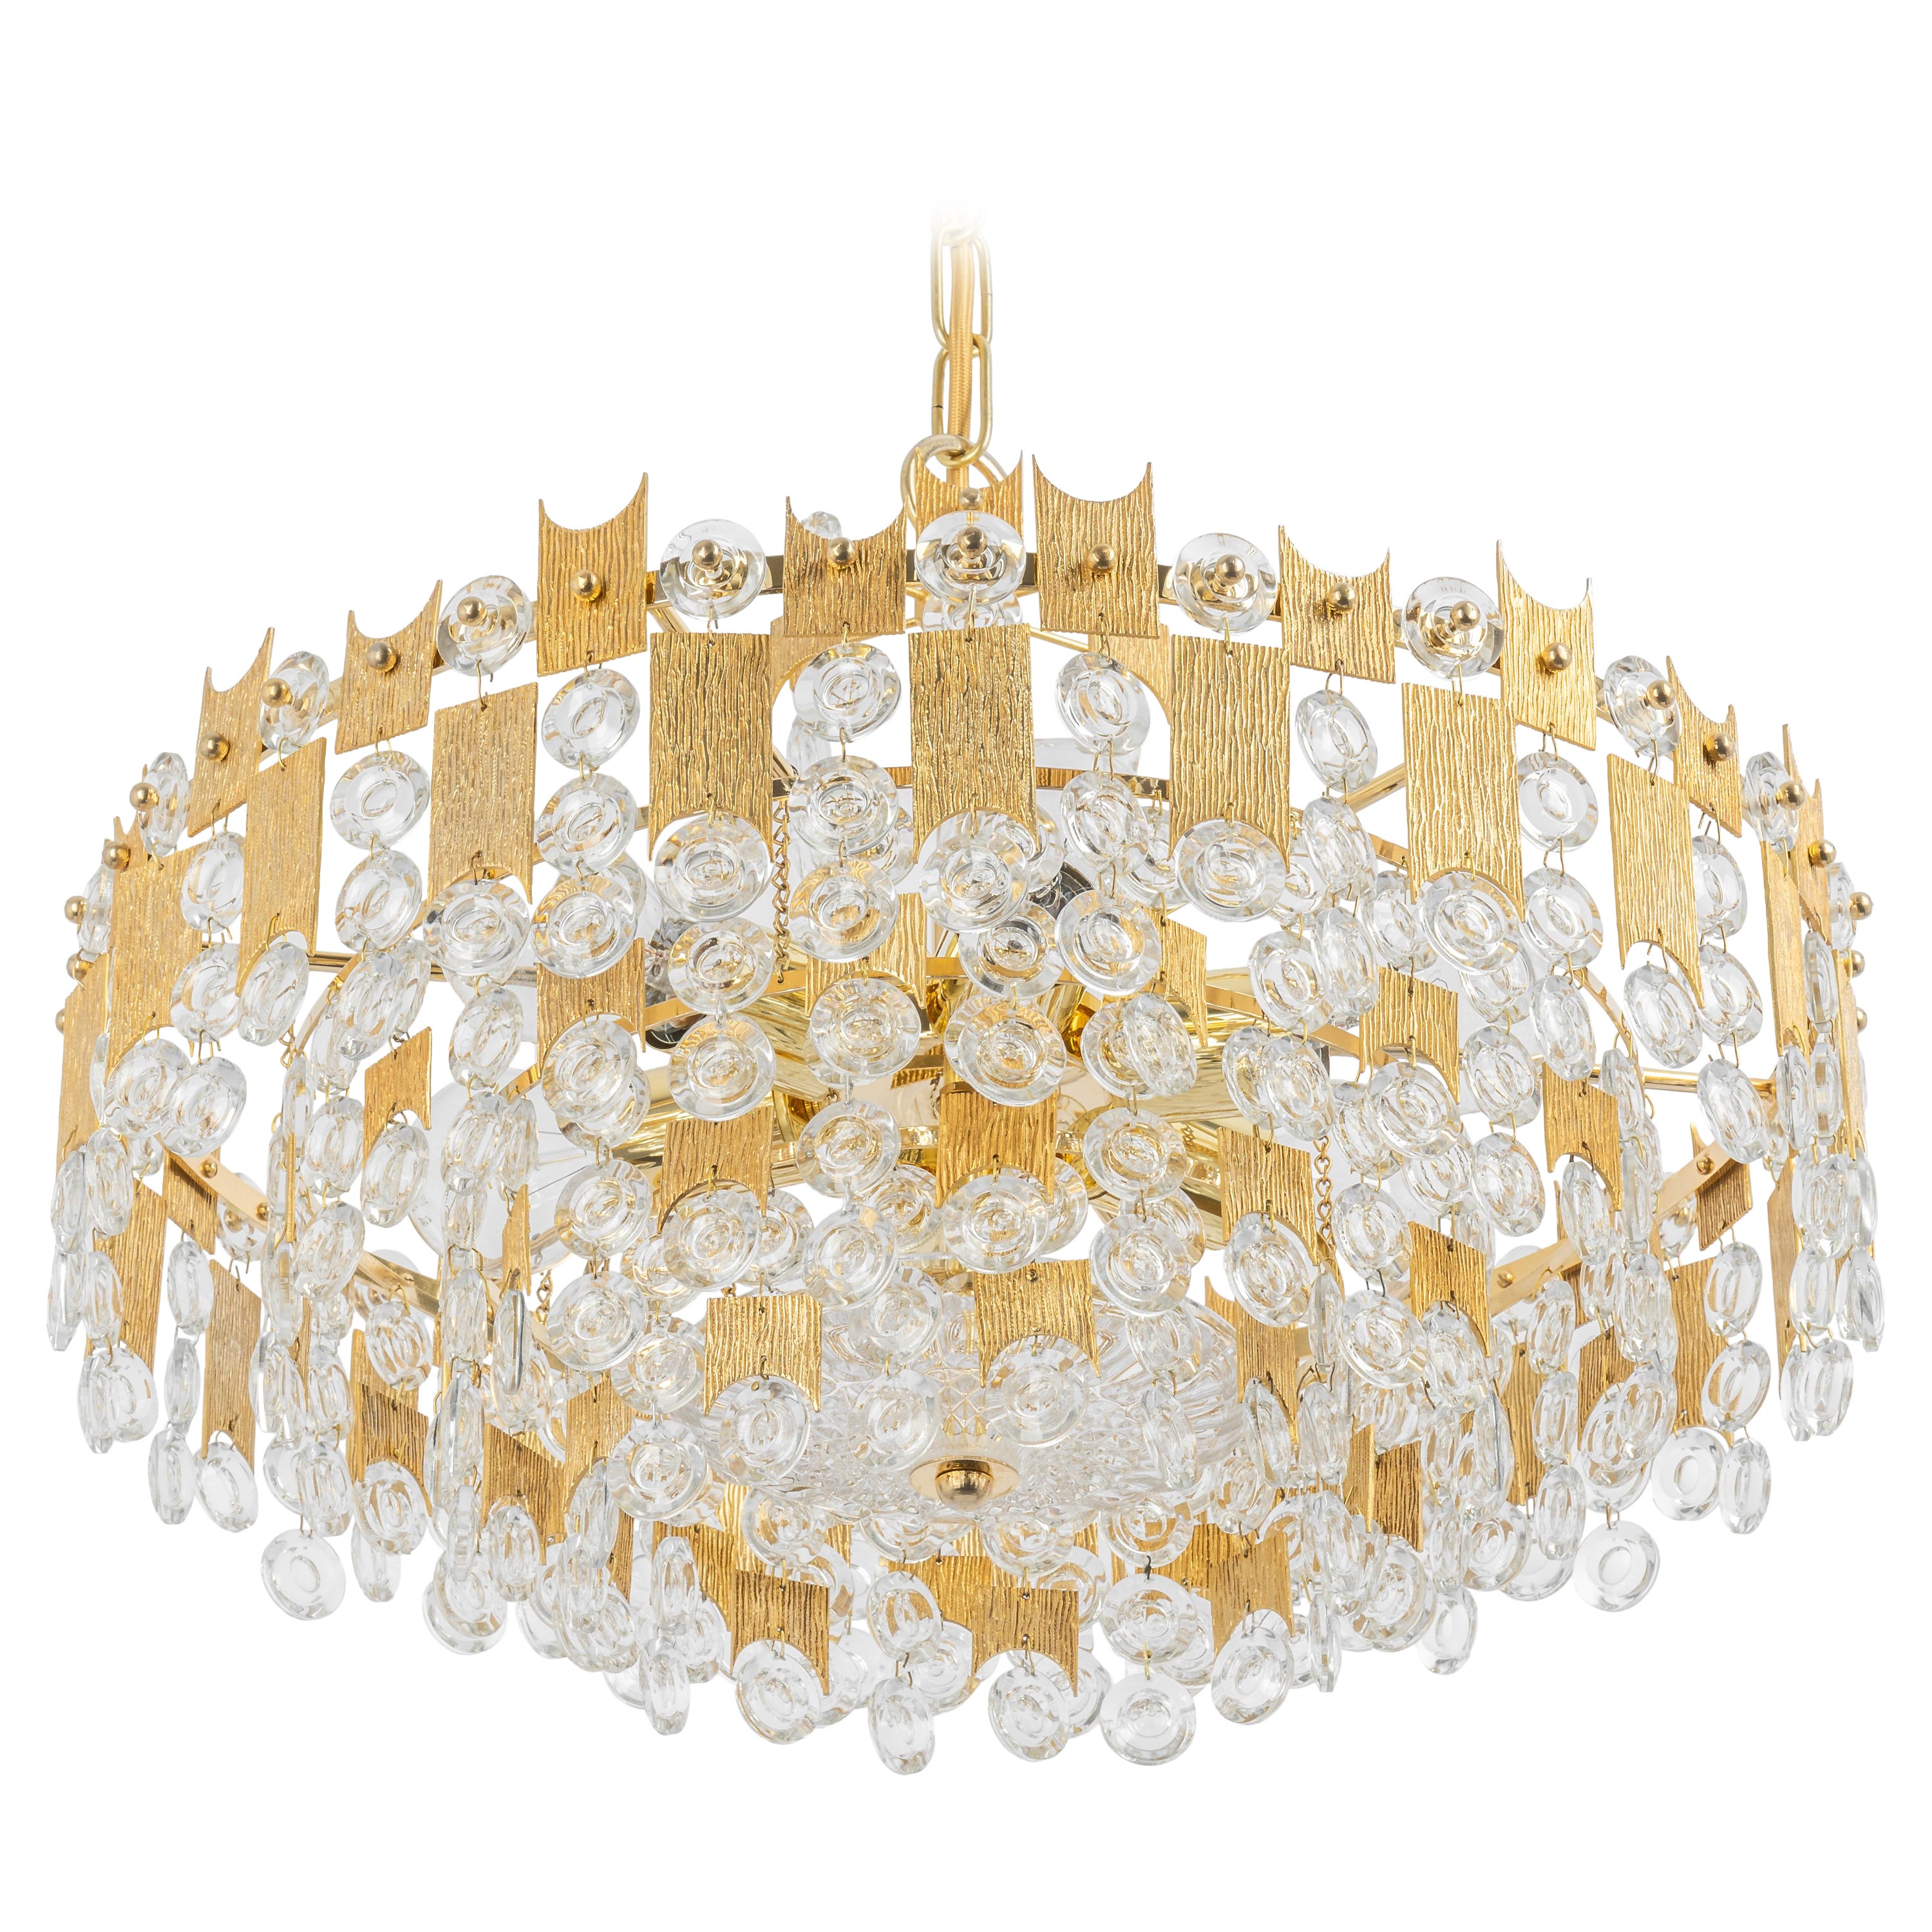 Impressive Large Gilt Brass and Crystal Glass Chandelier by Palwa Germany, 1960s For Sale